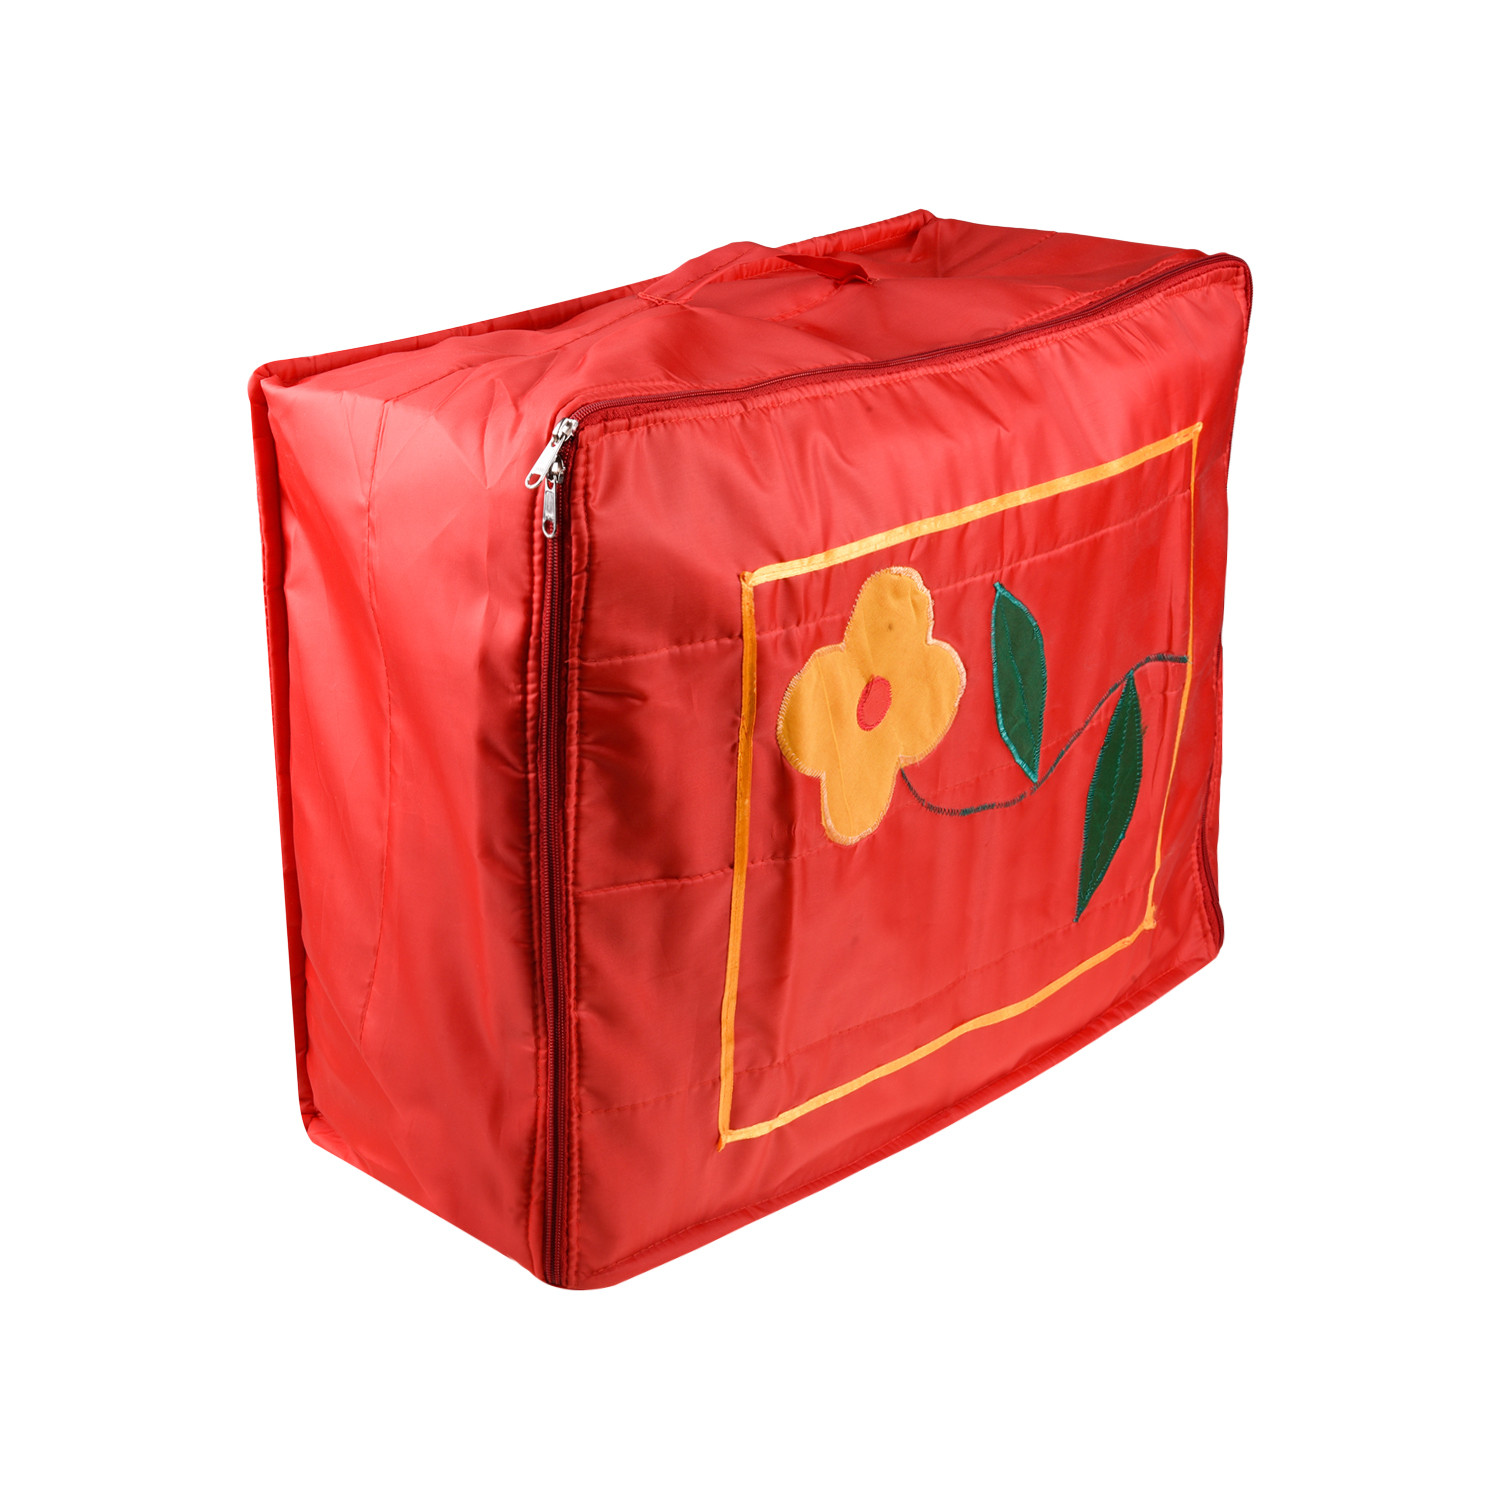 Kuber Industries Saree Cover | Parachute Wardrobe Organizer for Travel | Foldable Flower Applique Print Clothes Storage Bag with Zipper | Extra Large | Red